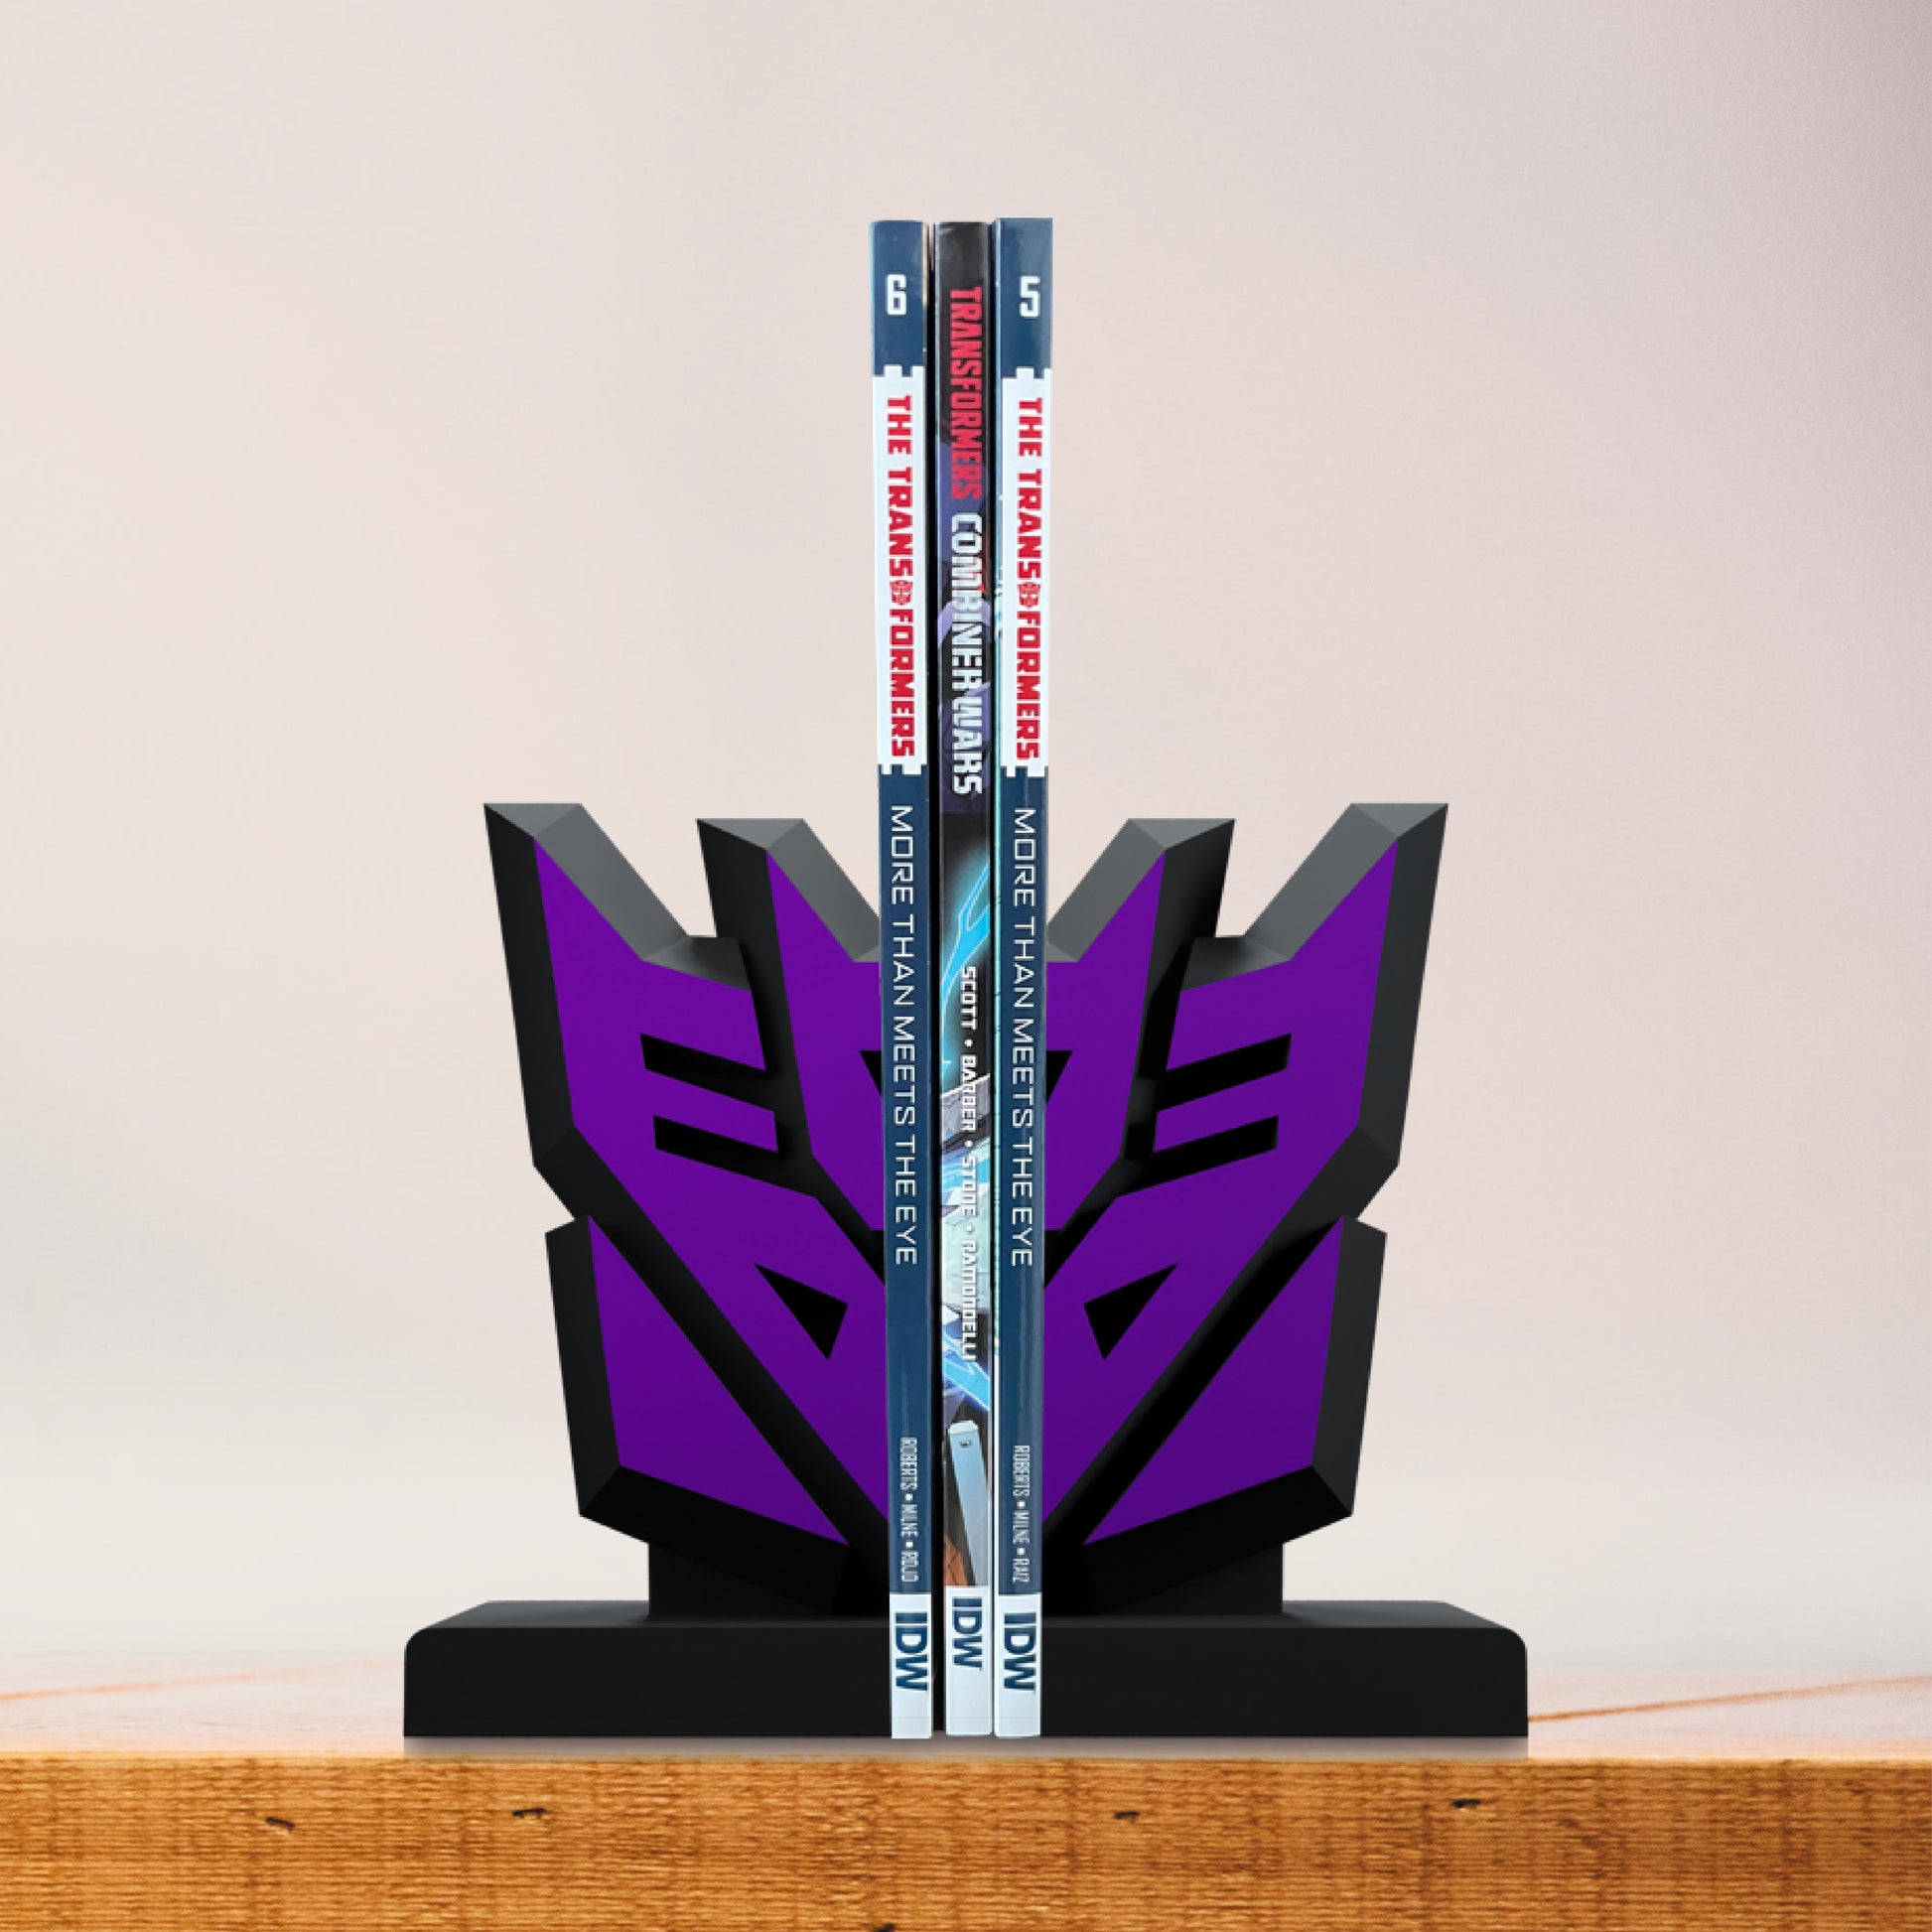 Transformers Decepticon Faction Bookend - Available 1st Quarter 2023 - Icon Heroes 